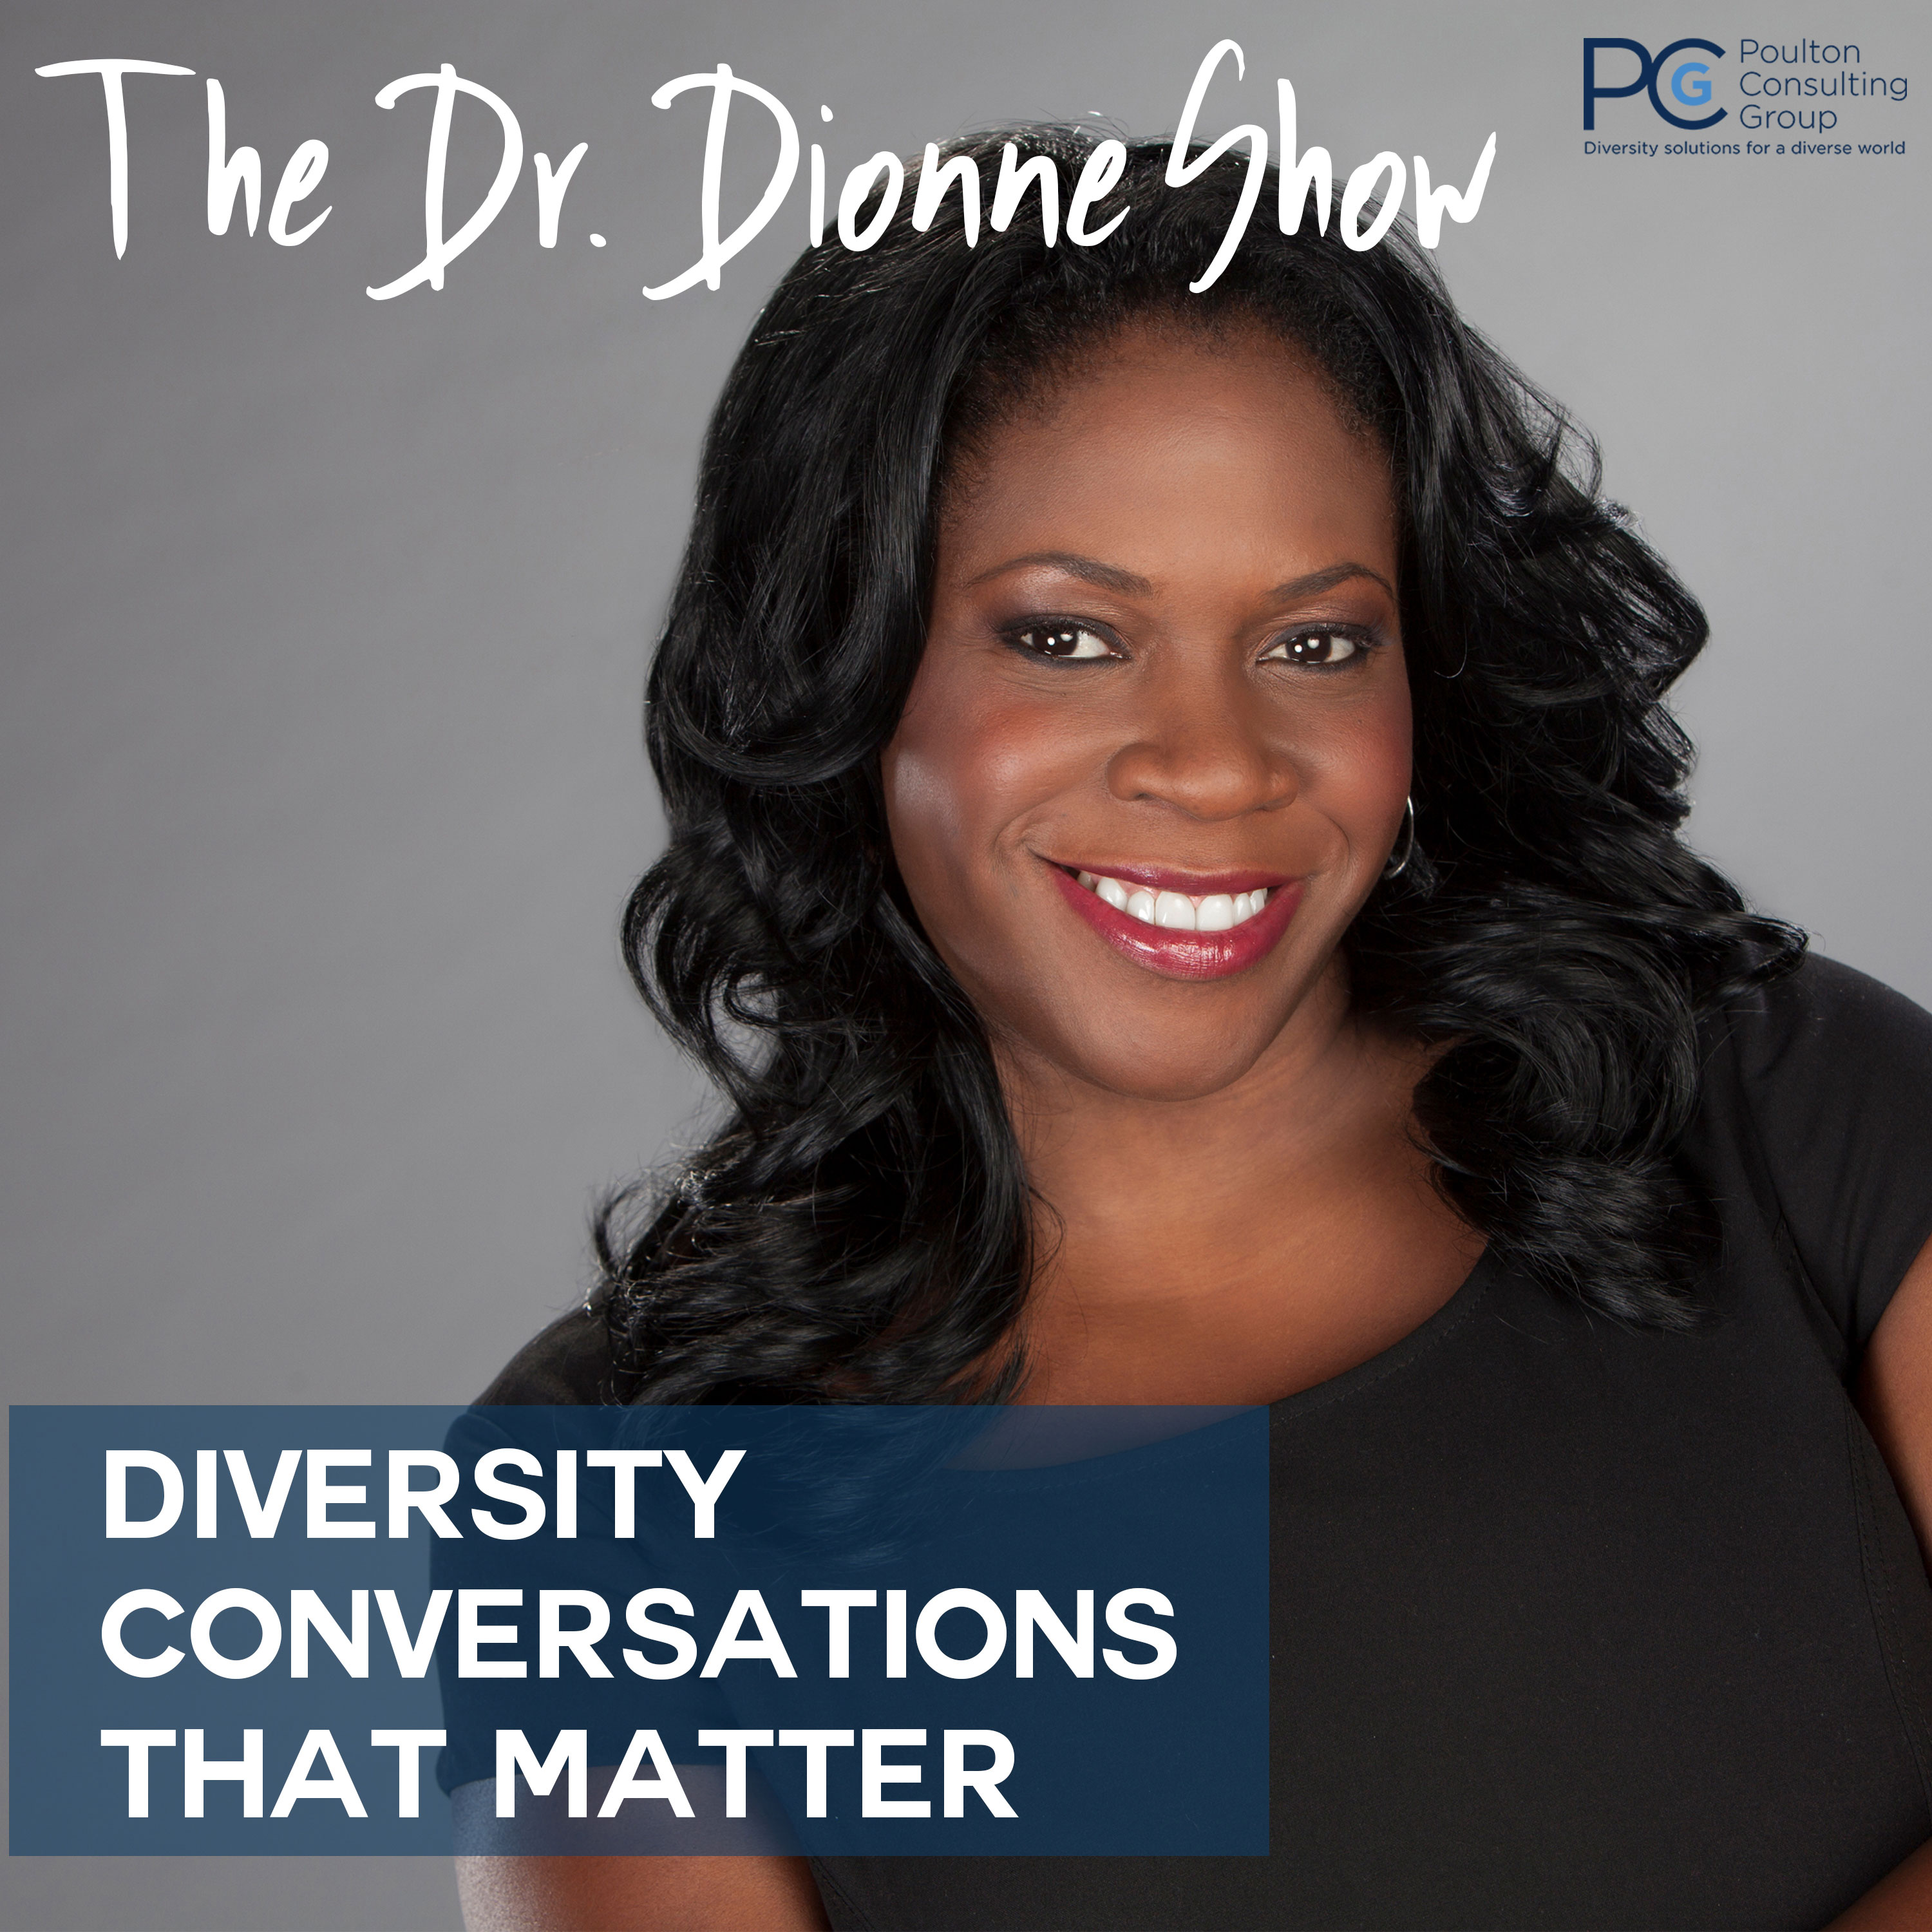 The Dr. Dionne Show